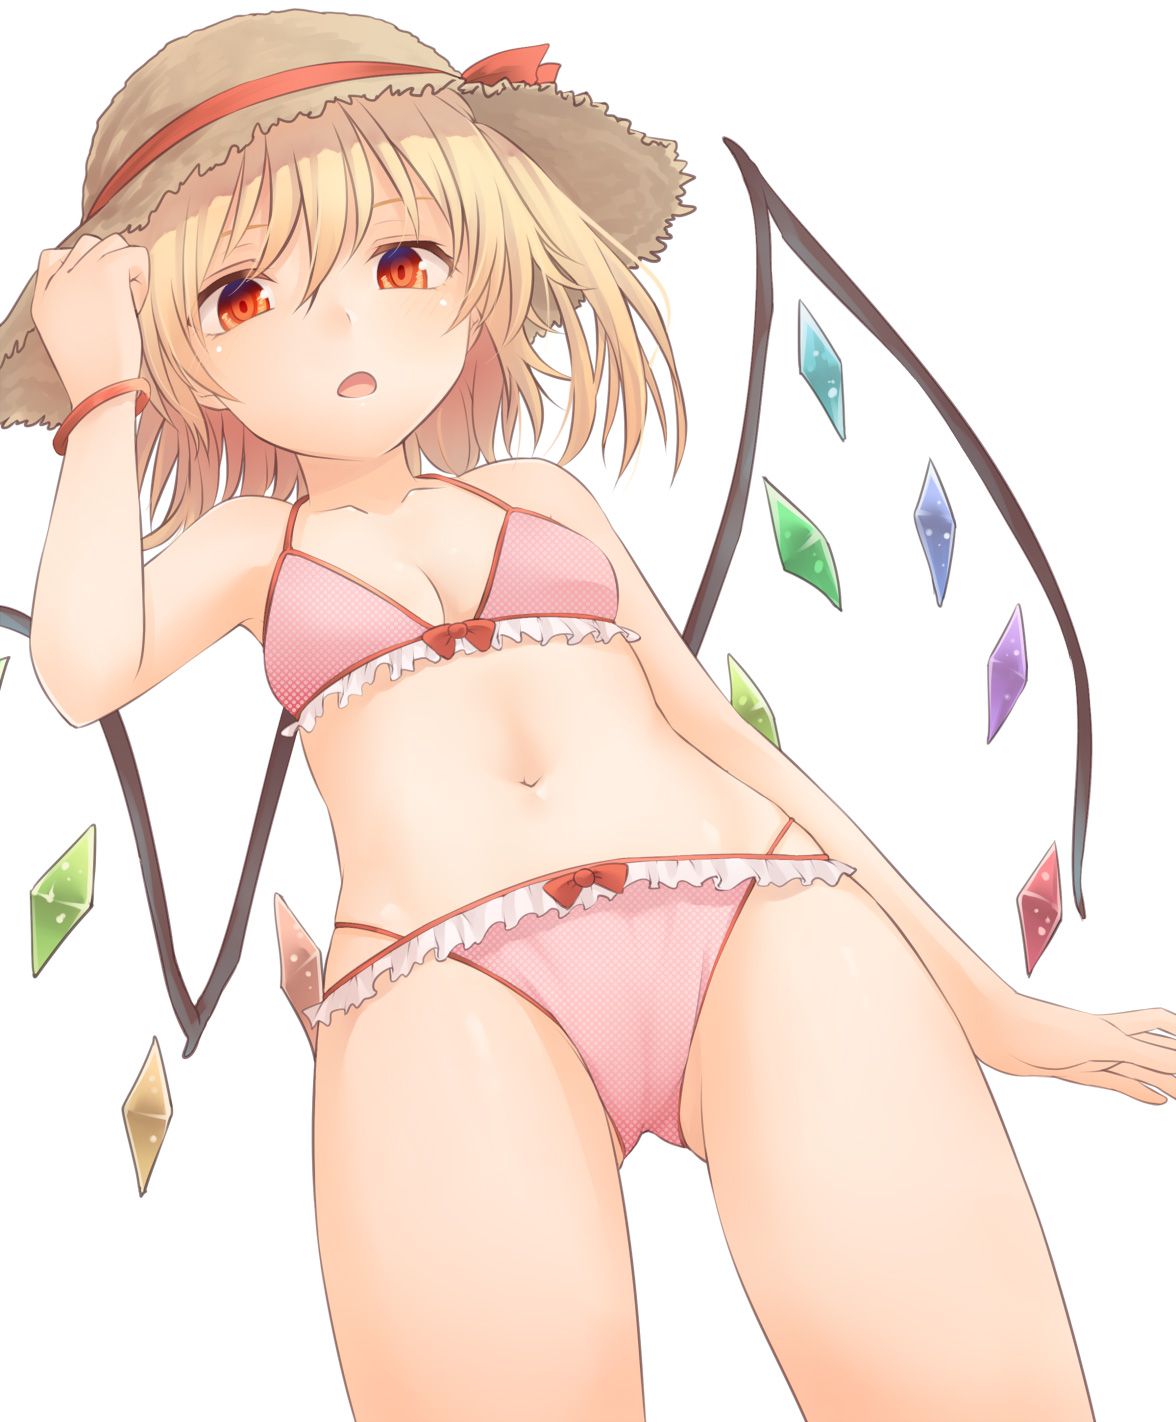 [Touhou] Secondary erotic images of female characters 3 70 photos 26